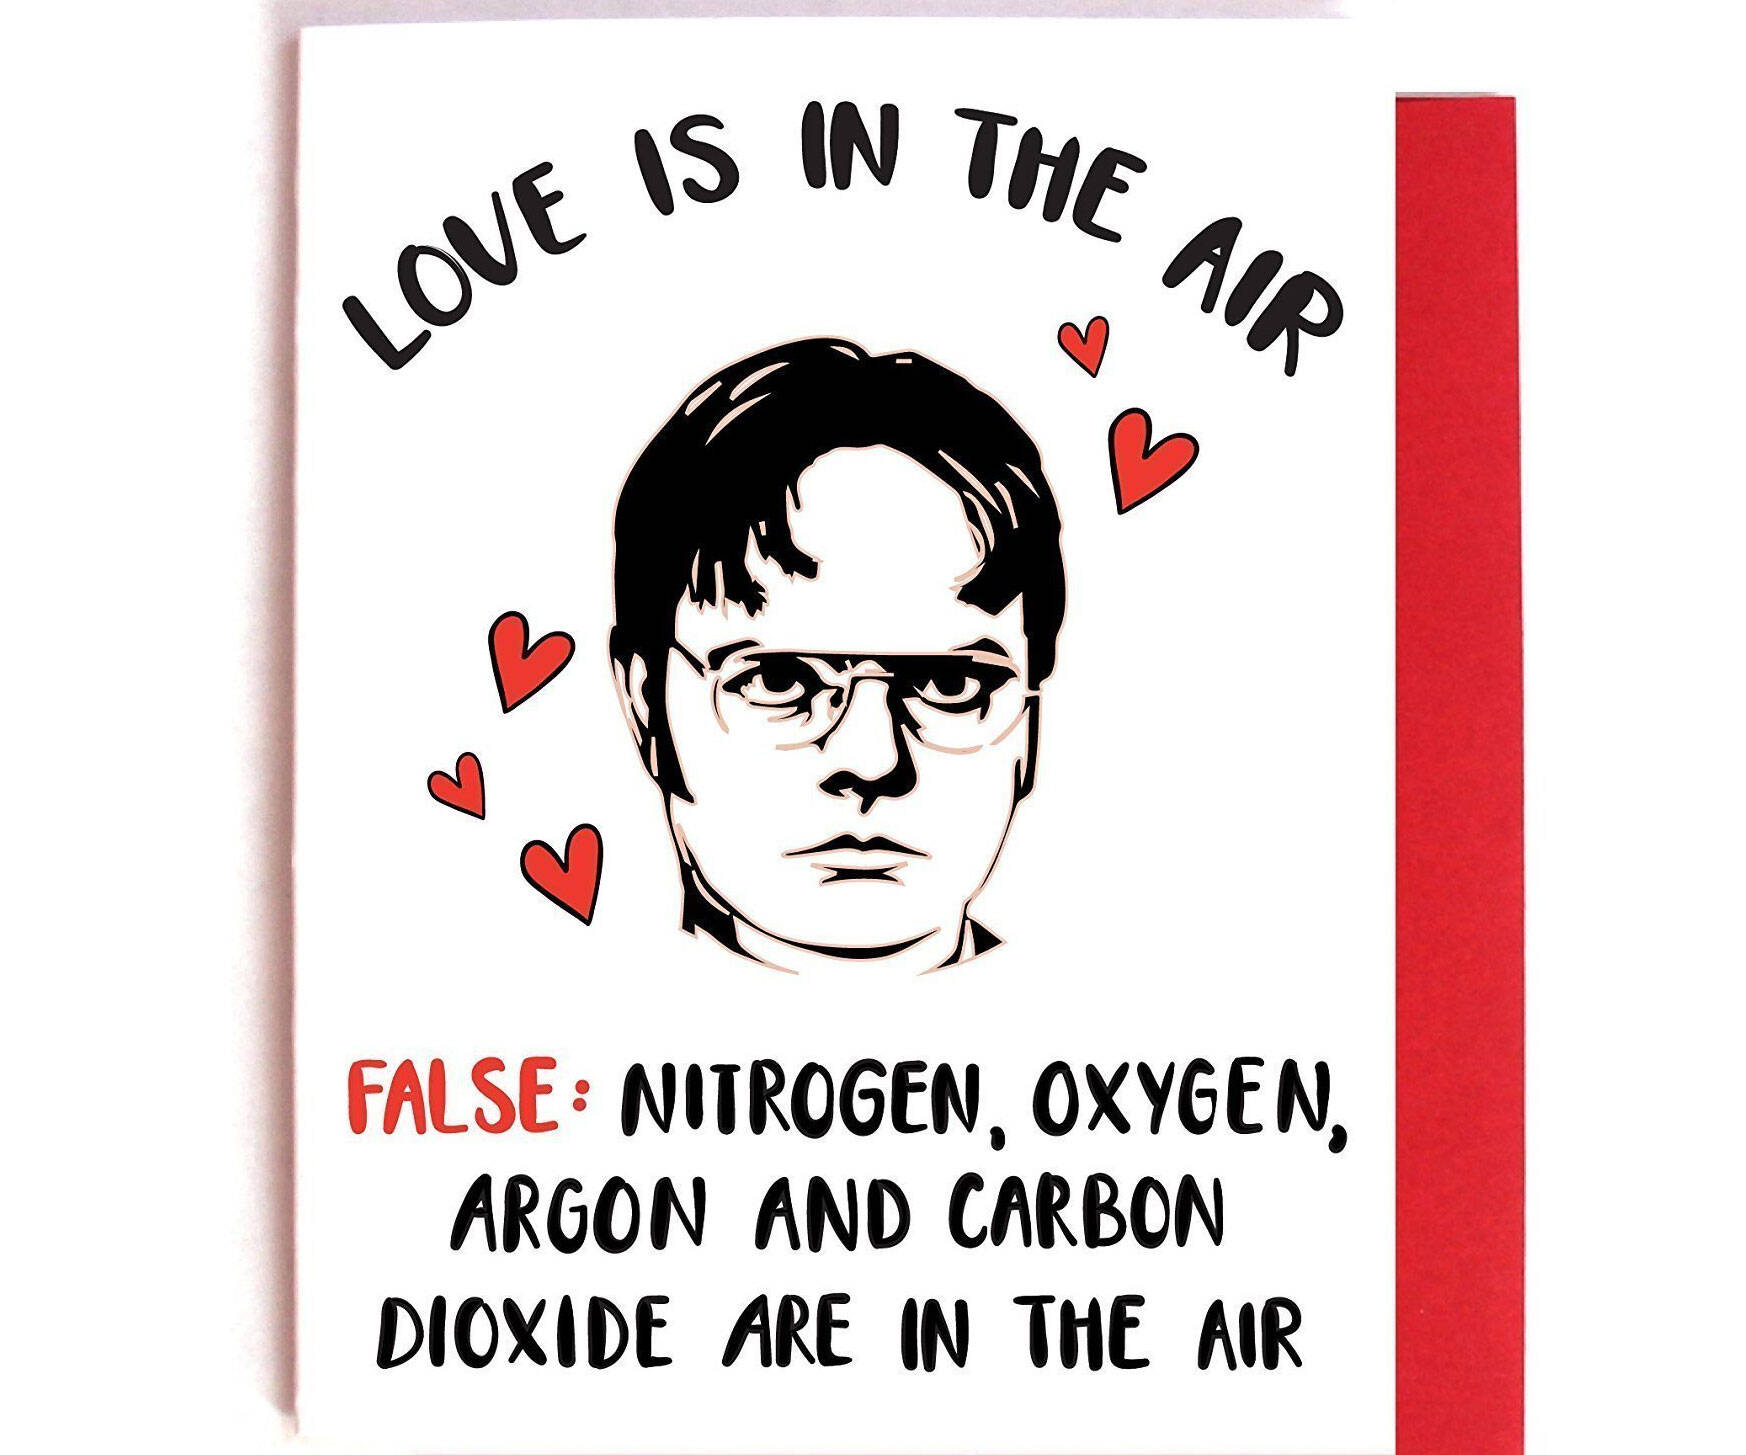 Anti-Love Valentine's Day Card - coolthings.us